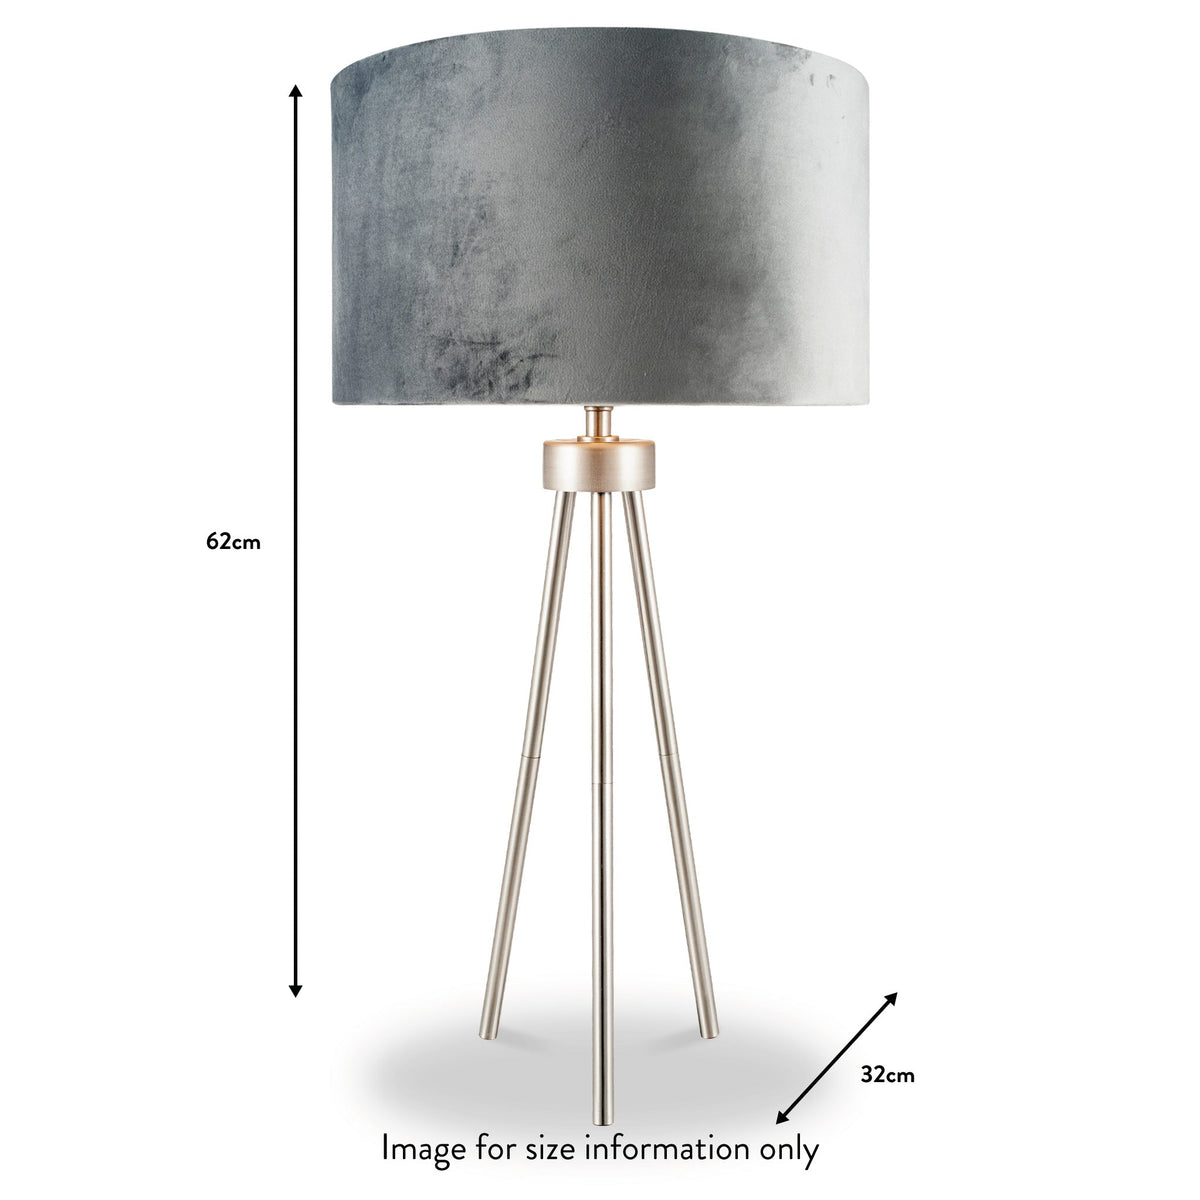 Houston Brushed Silver Metal Tripod Table Lamp dimensions